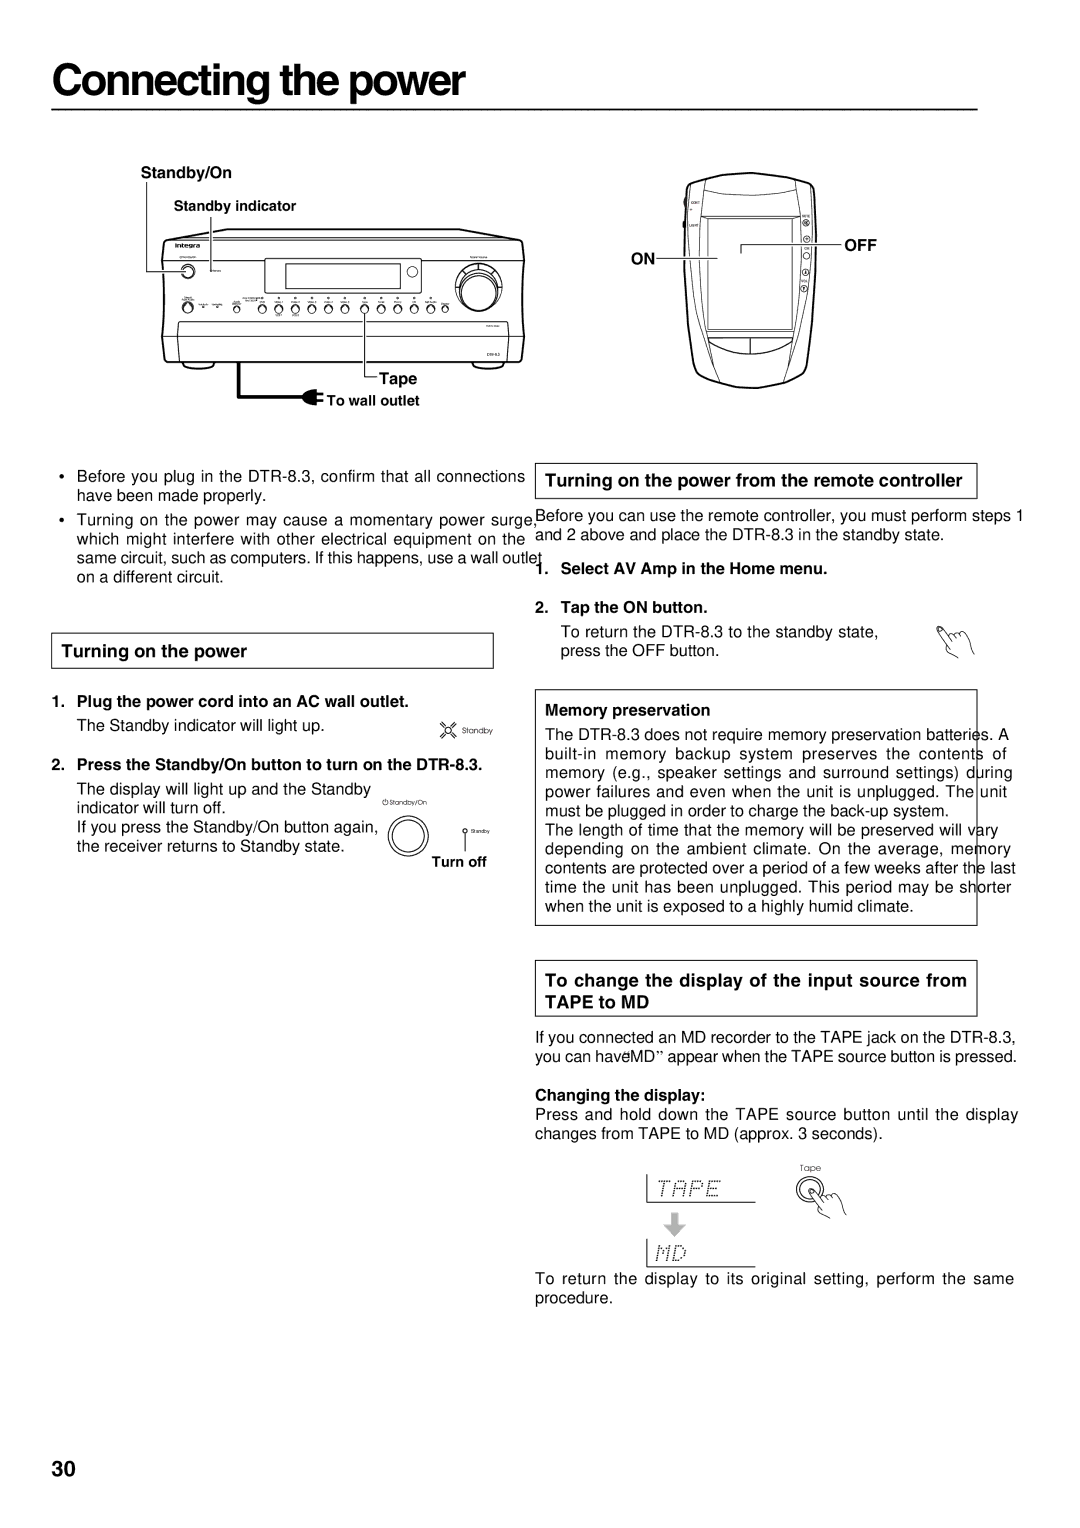 Integra DTR-8.3 instruction manual Connecting the power, Turning on the power from the remote controller 